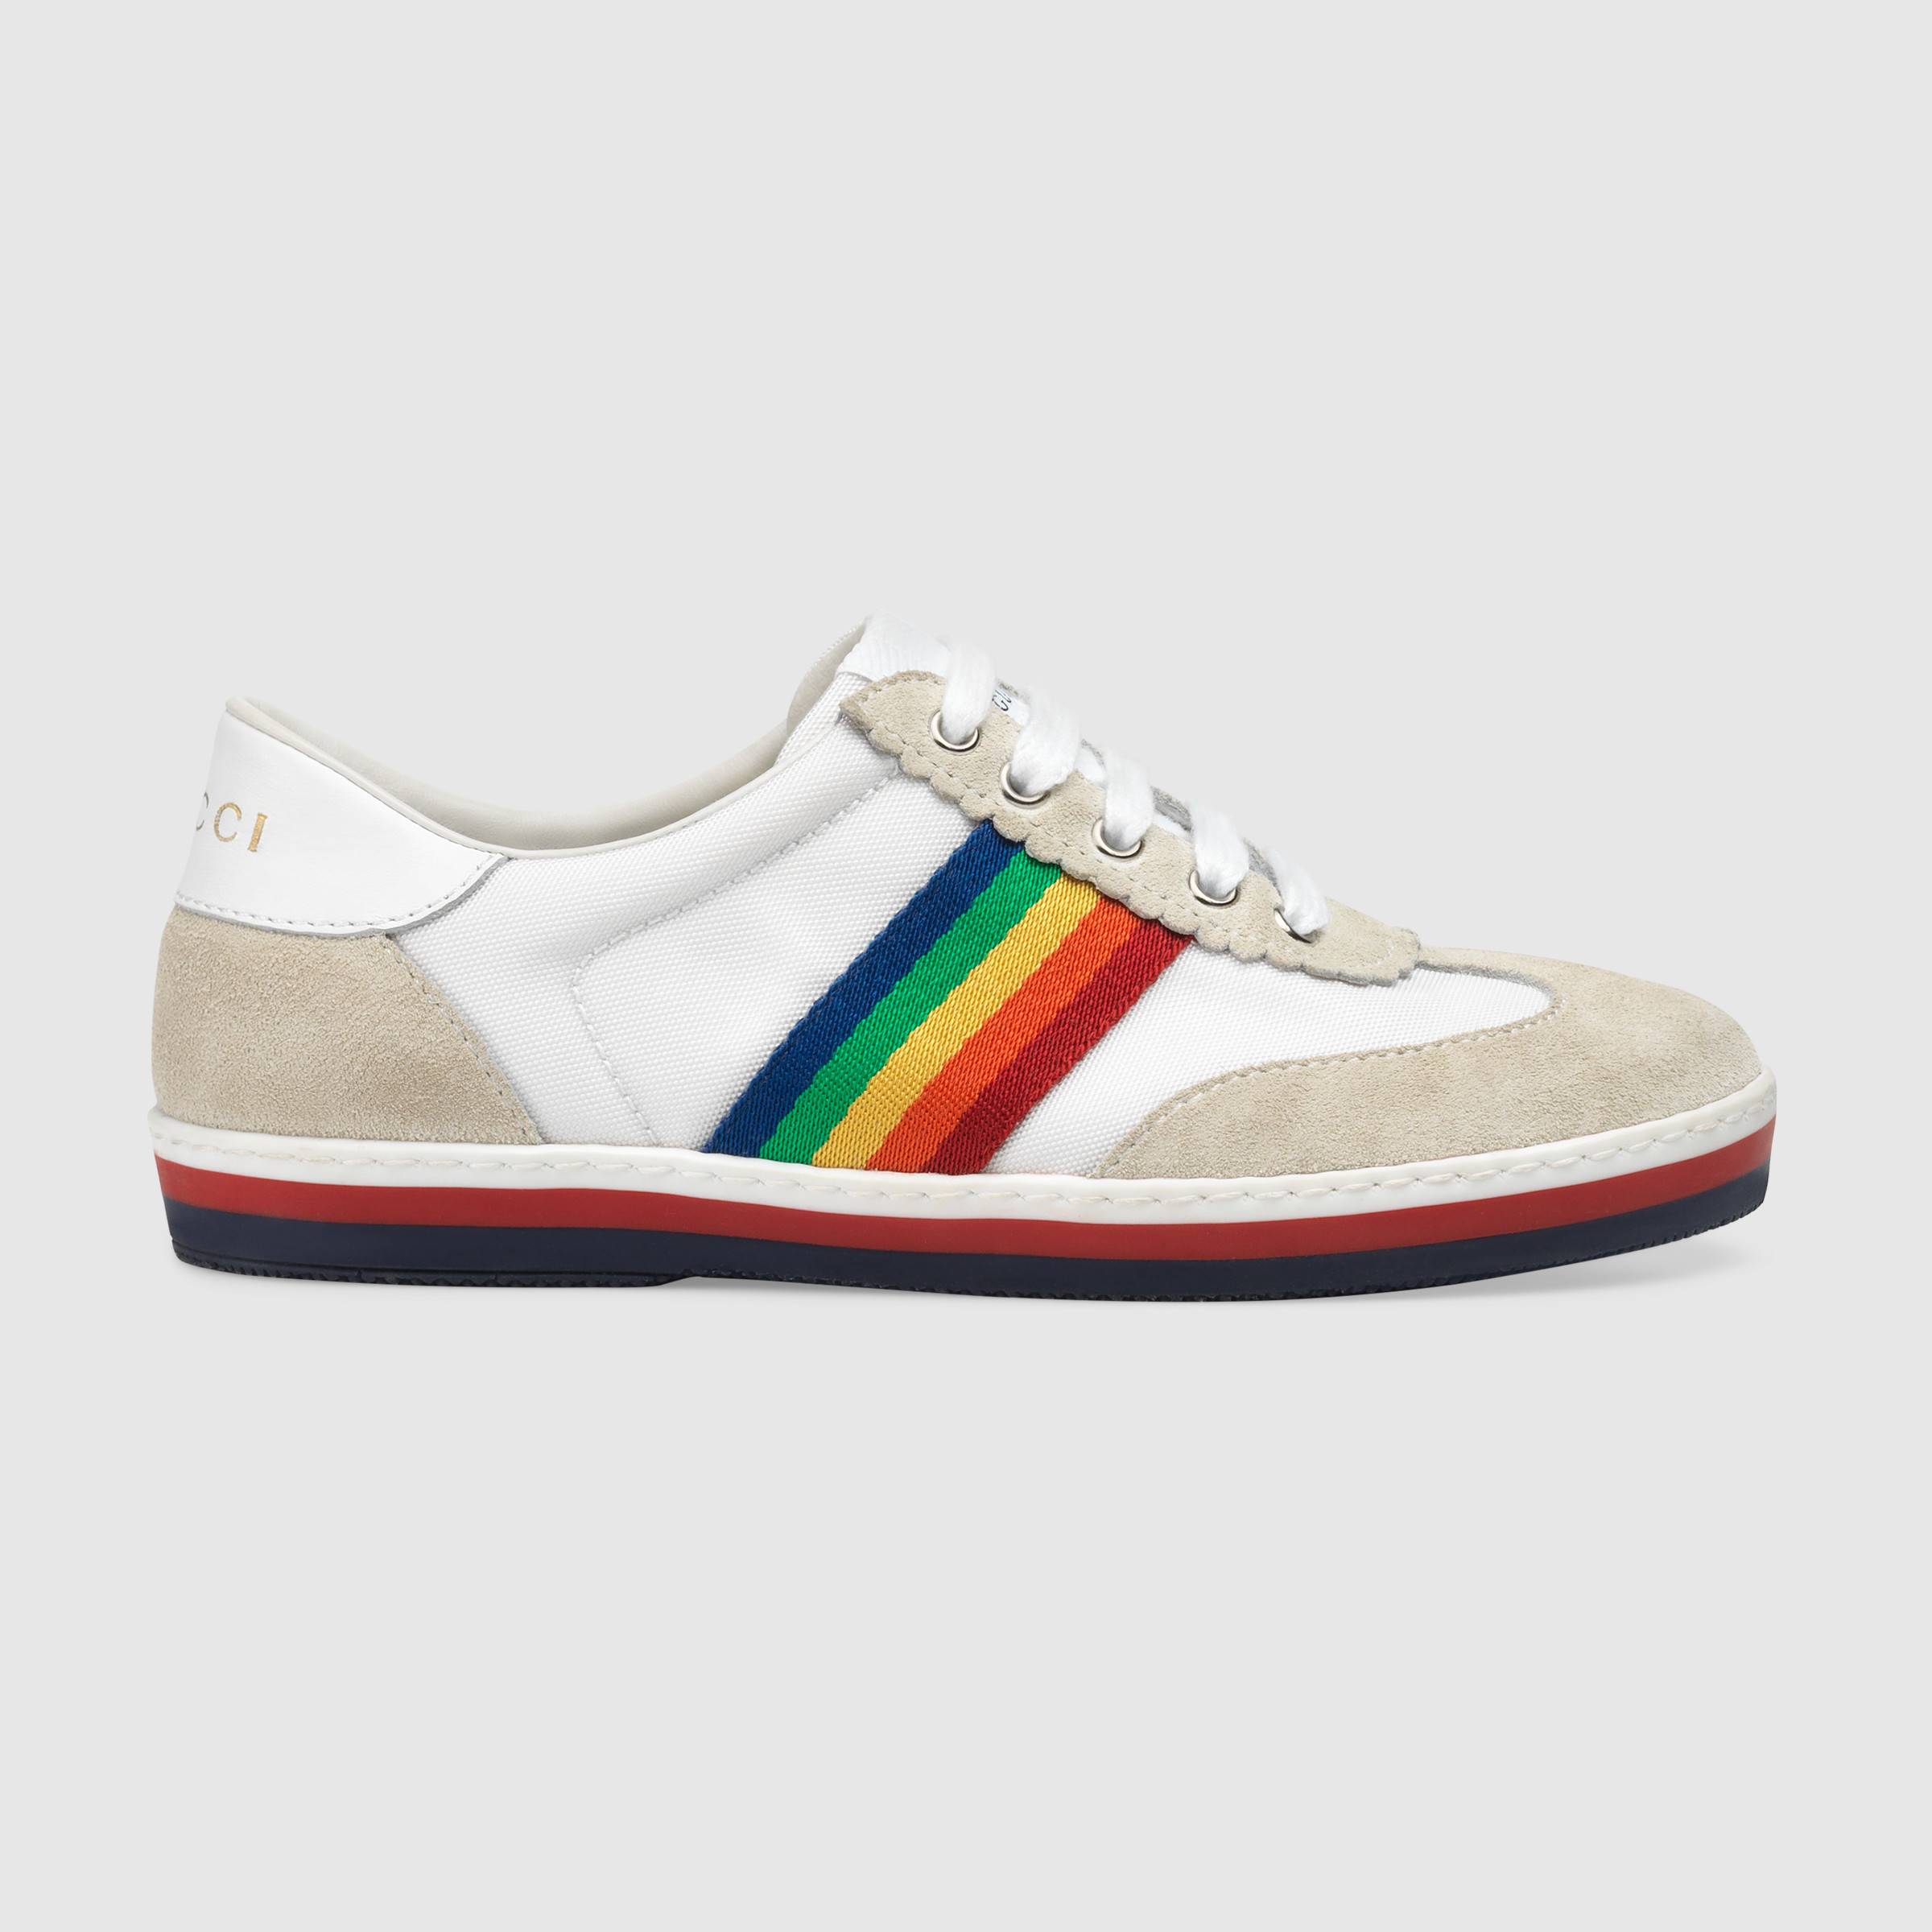 Boys and Girls White & Chromatic Stripes Shoes